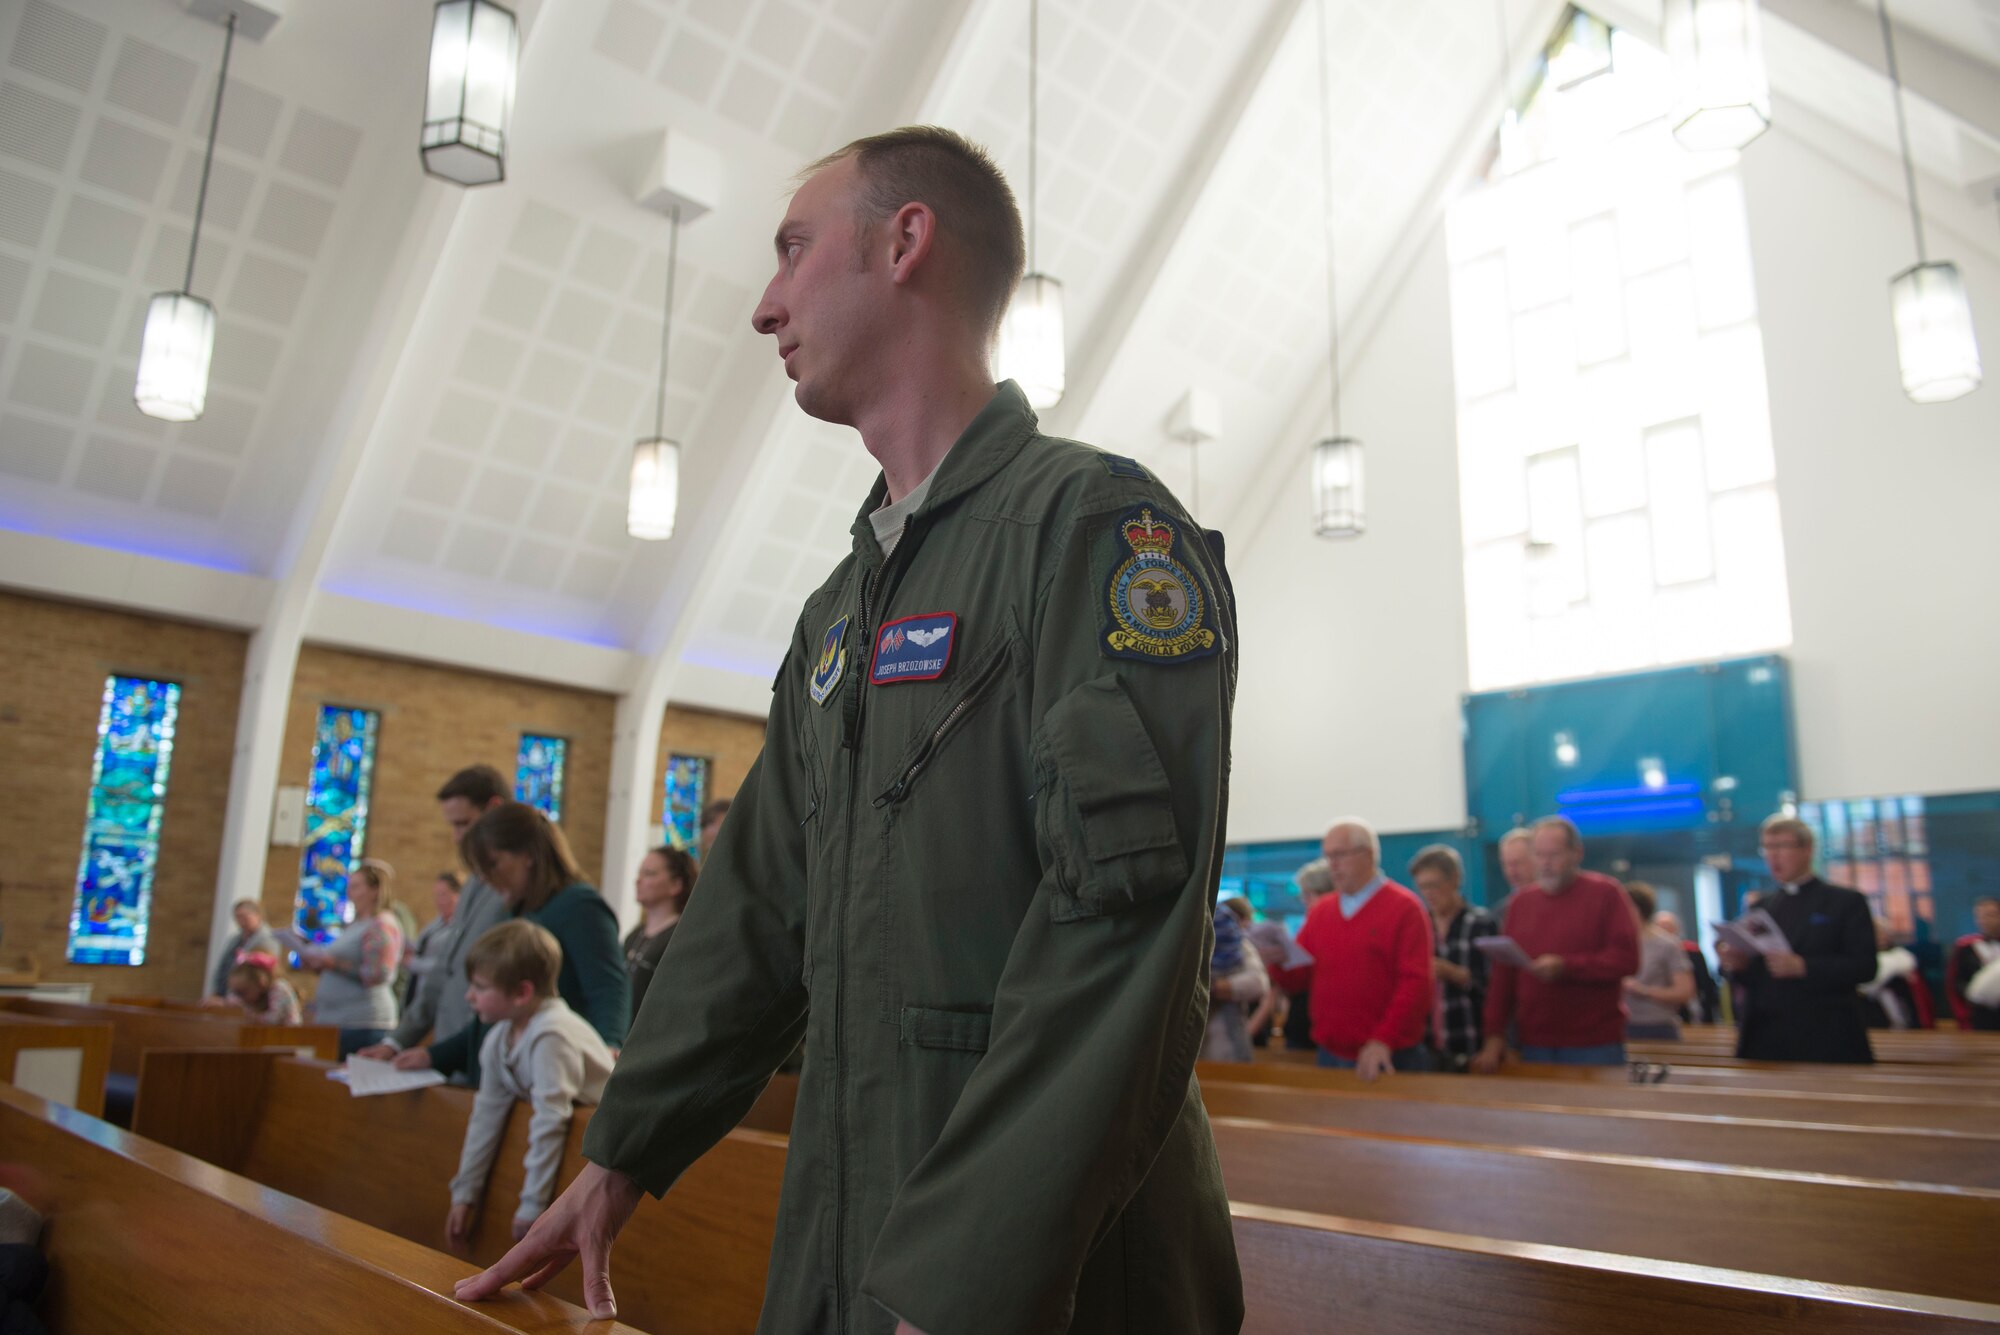 U.S. Air Force Capt Joseph Brzozowske, 100 Air Refueling Wing chief of wing readiness inspections stands for prayer during the final Catholic mass at RAF Mildenhall, England, May 14, 2018.  Those who practice the Catholic faith will still have a home at RAF Lakenheath’s chapel. (U.S. Air Force photo by Airman 1st Class Alexandria Lee)